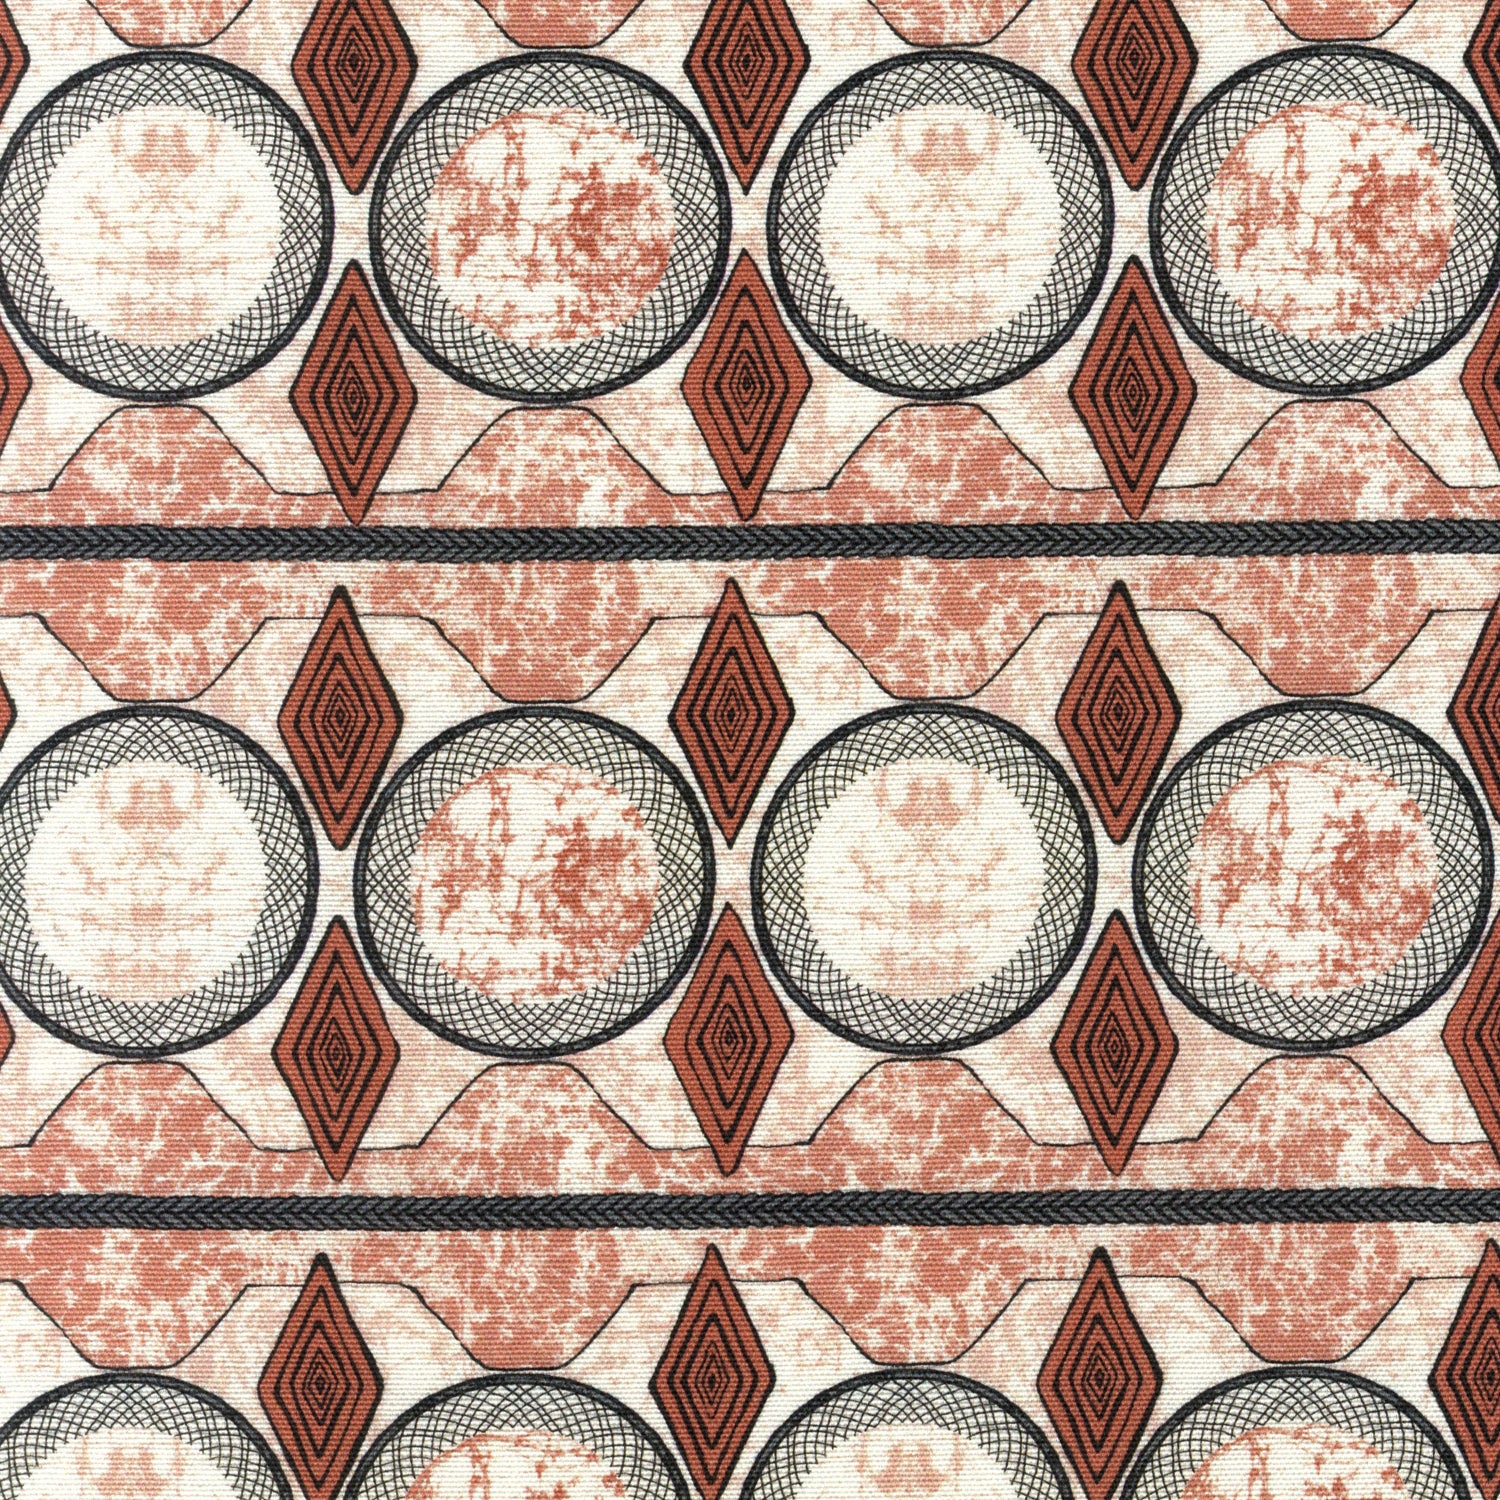 Detail of fabric in an intricate geometric stripe in shades of rust, gray and cream.